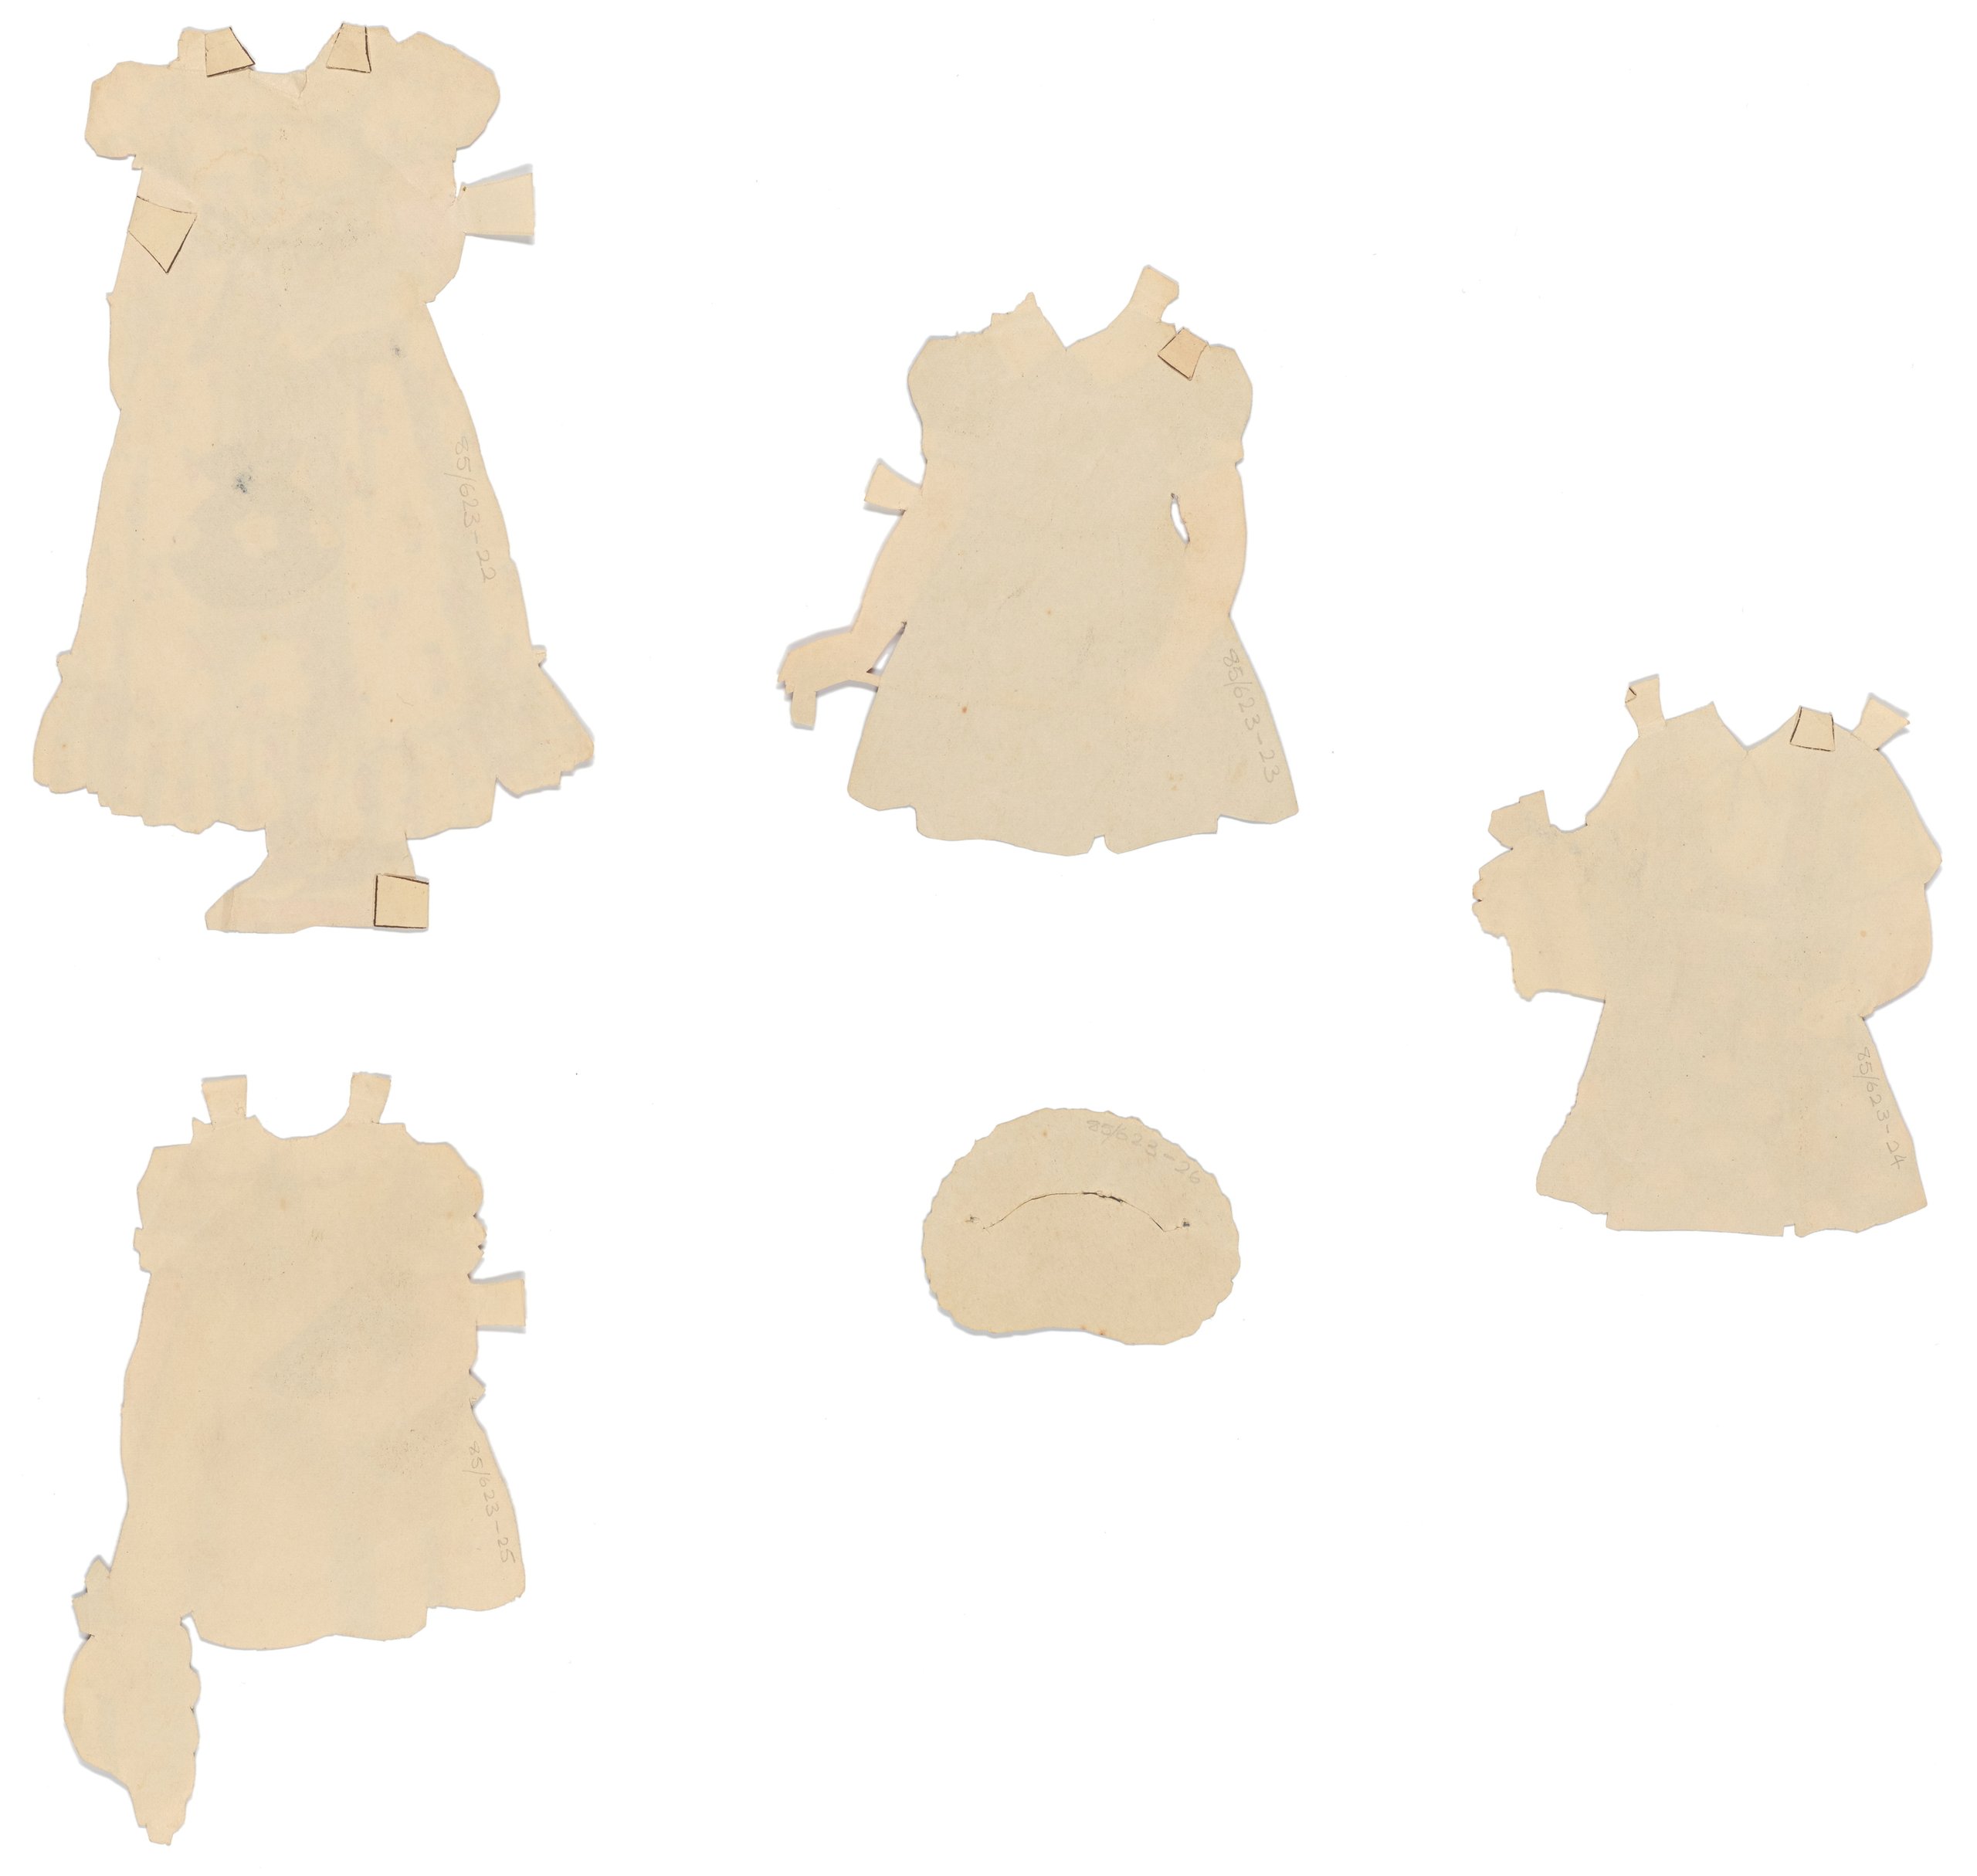 'The Princess Paper Doll Book' paper dolls featuring Queen Elizabeth and Princess Margaret